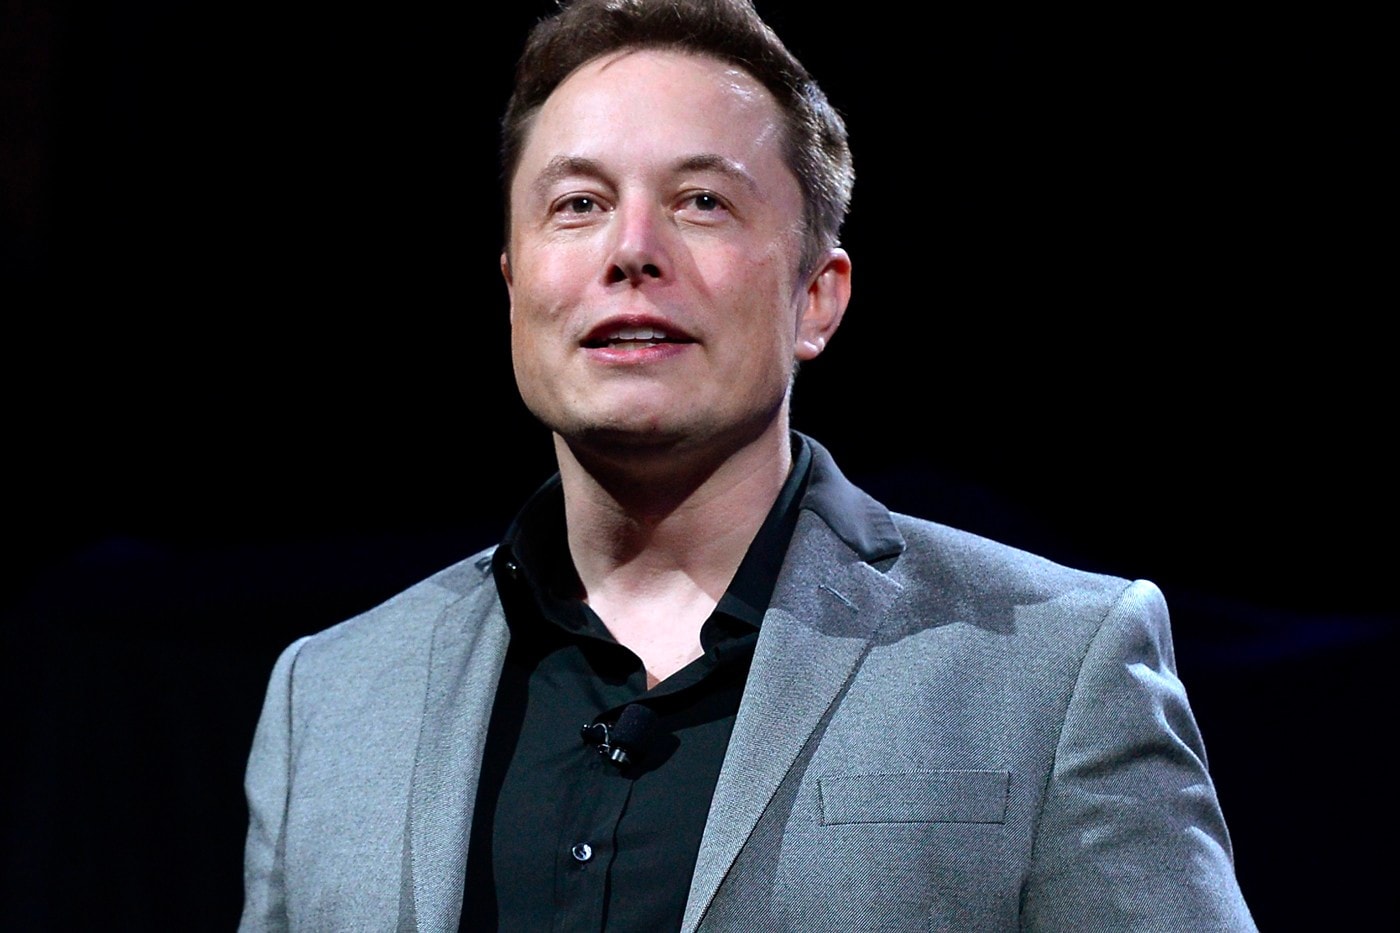 Elon Musk Worlds Fourth Richest Man person billionaire spacex tesla ceo shares stocks 300 percent growth cars electric vehicles cnbc report 